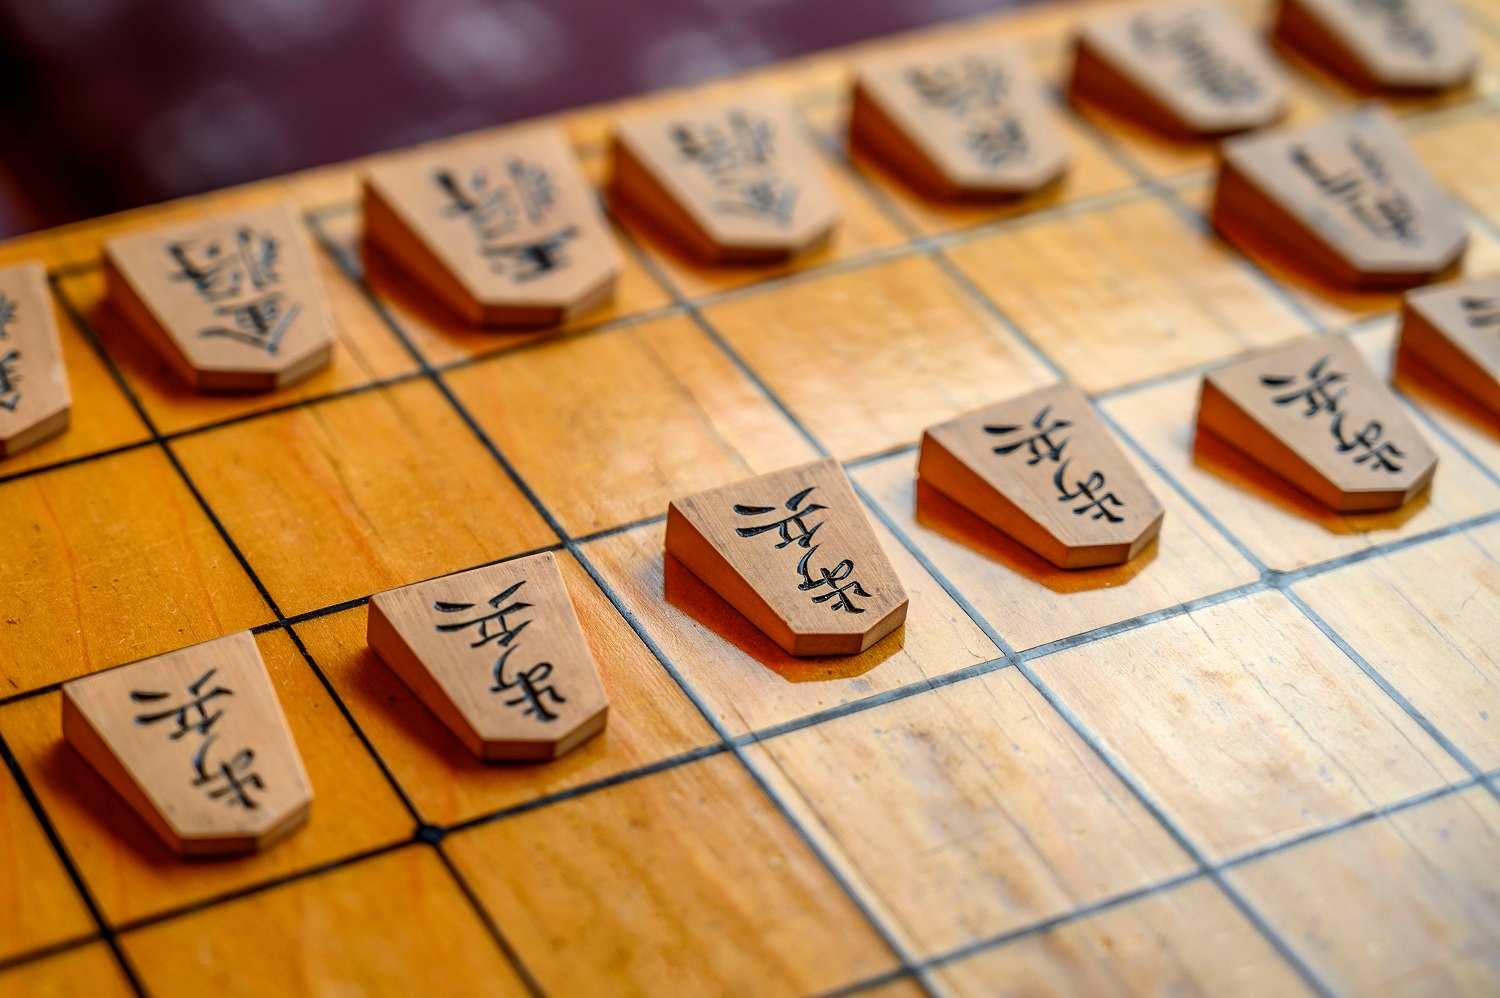 Play traditional Japanese board game of shogi with a Star Wars